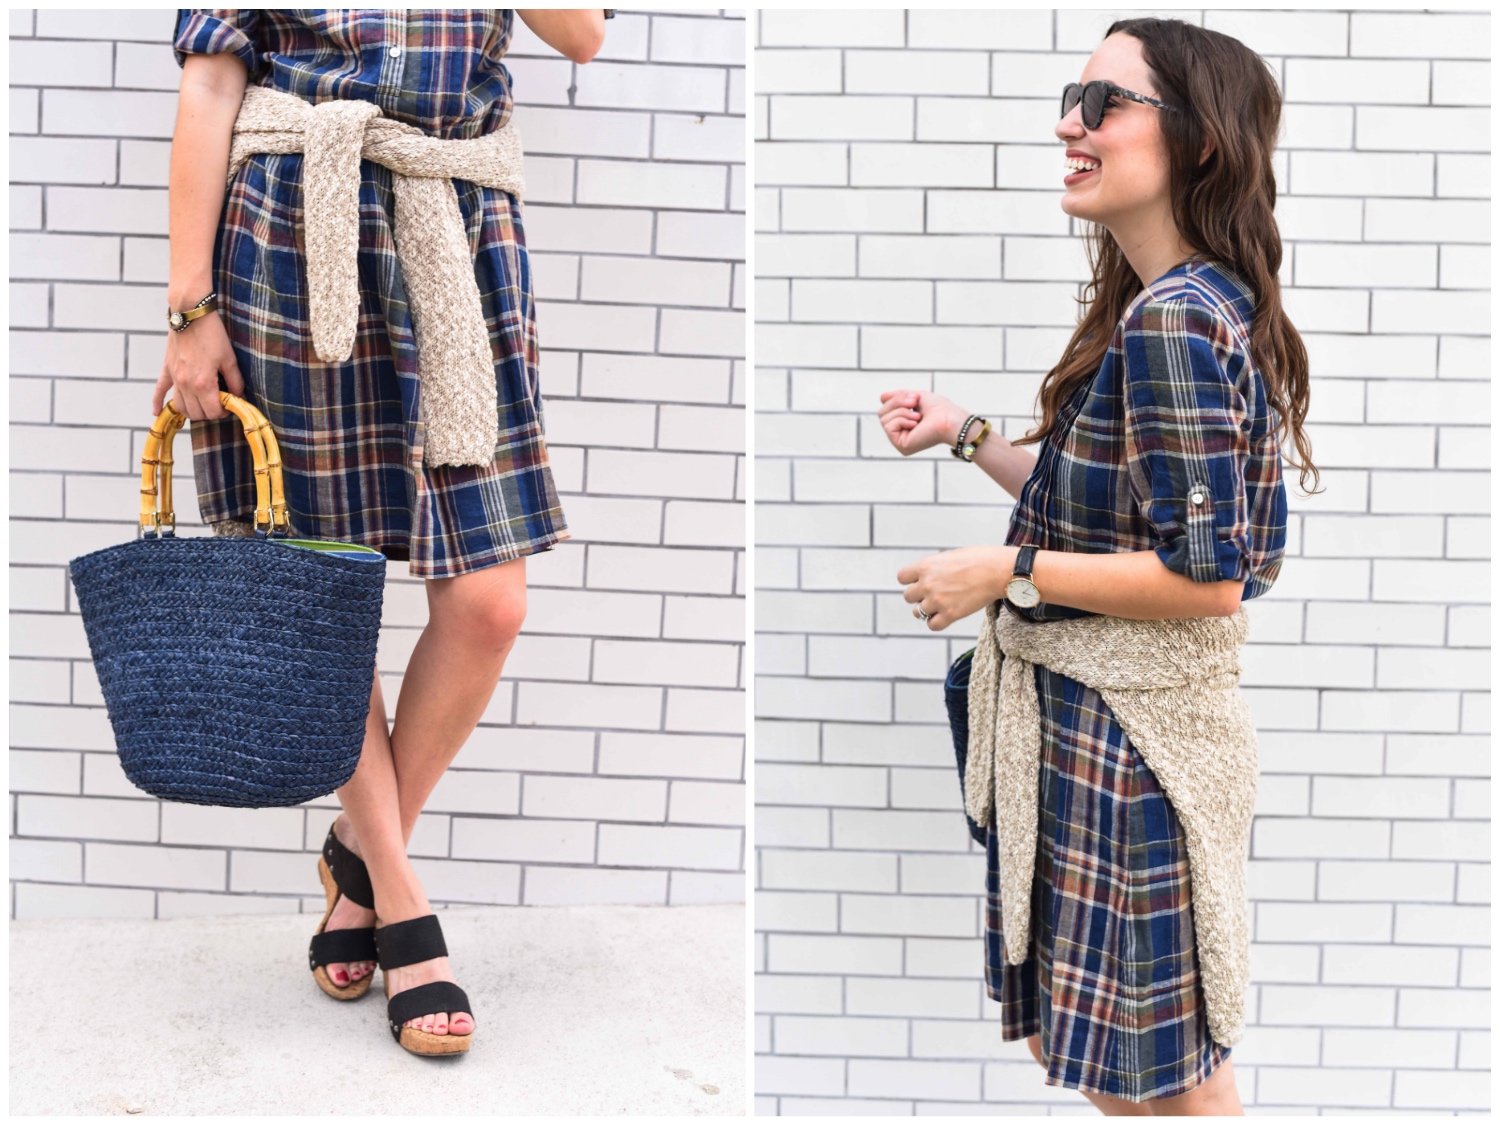 jmclaughlin plaid dress, fall transitional outfits, what to wear between summer and fall, navy bamboo tote bag, jmclaughlin fall 2016